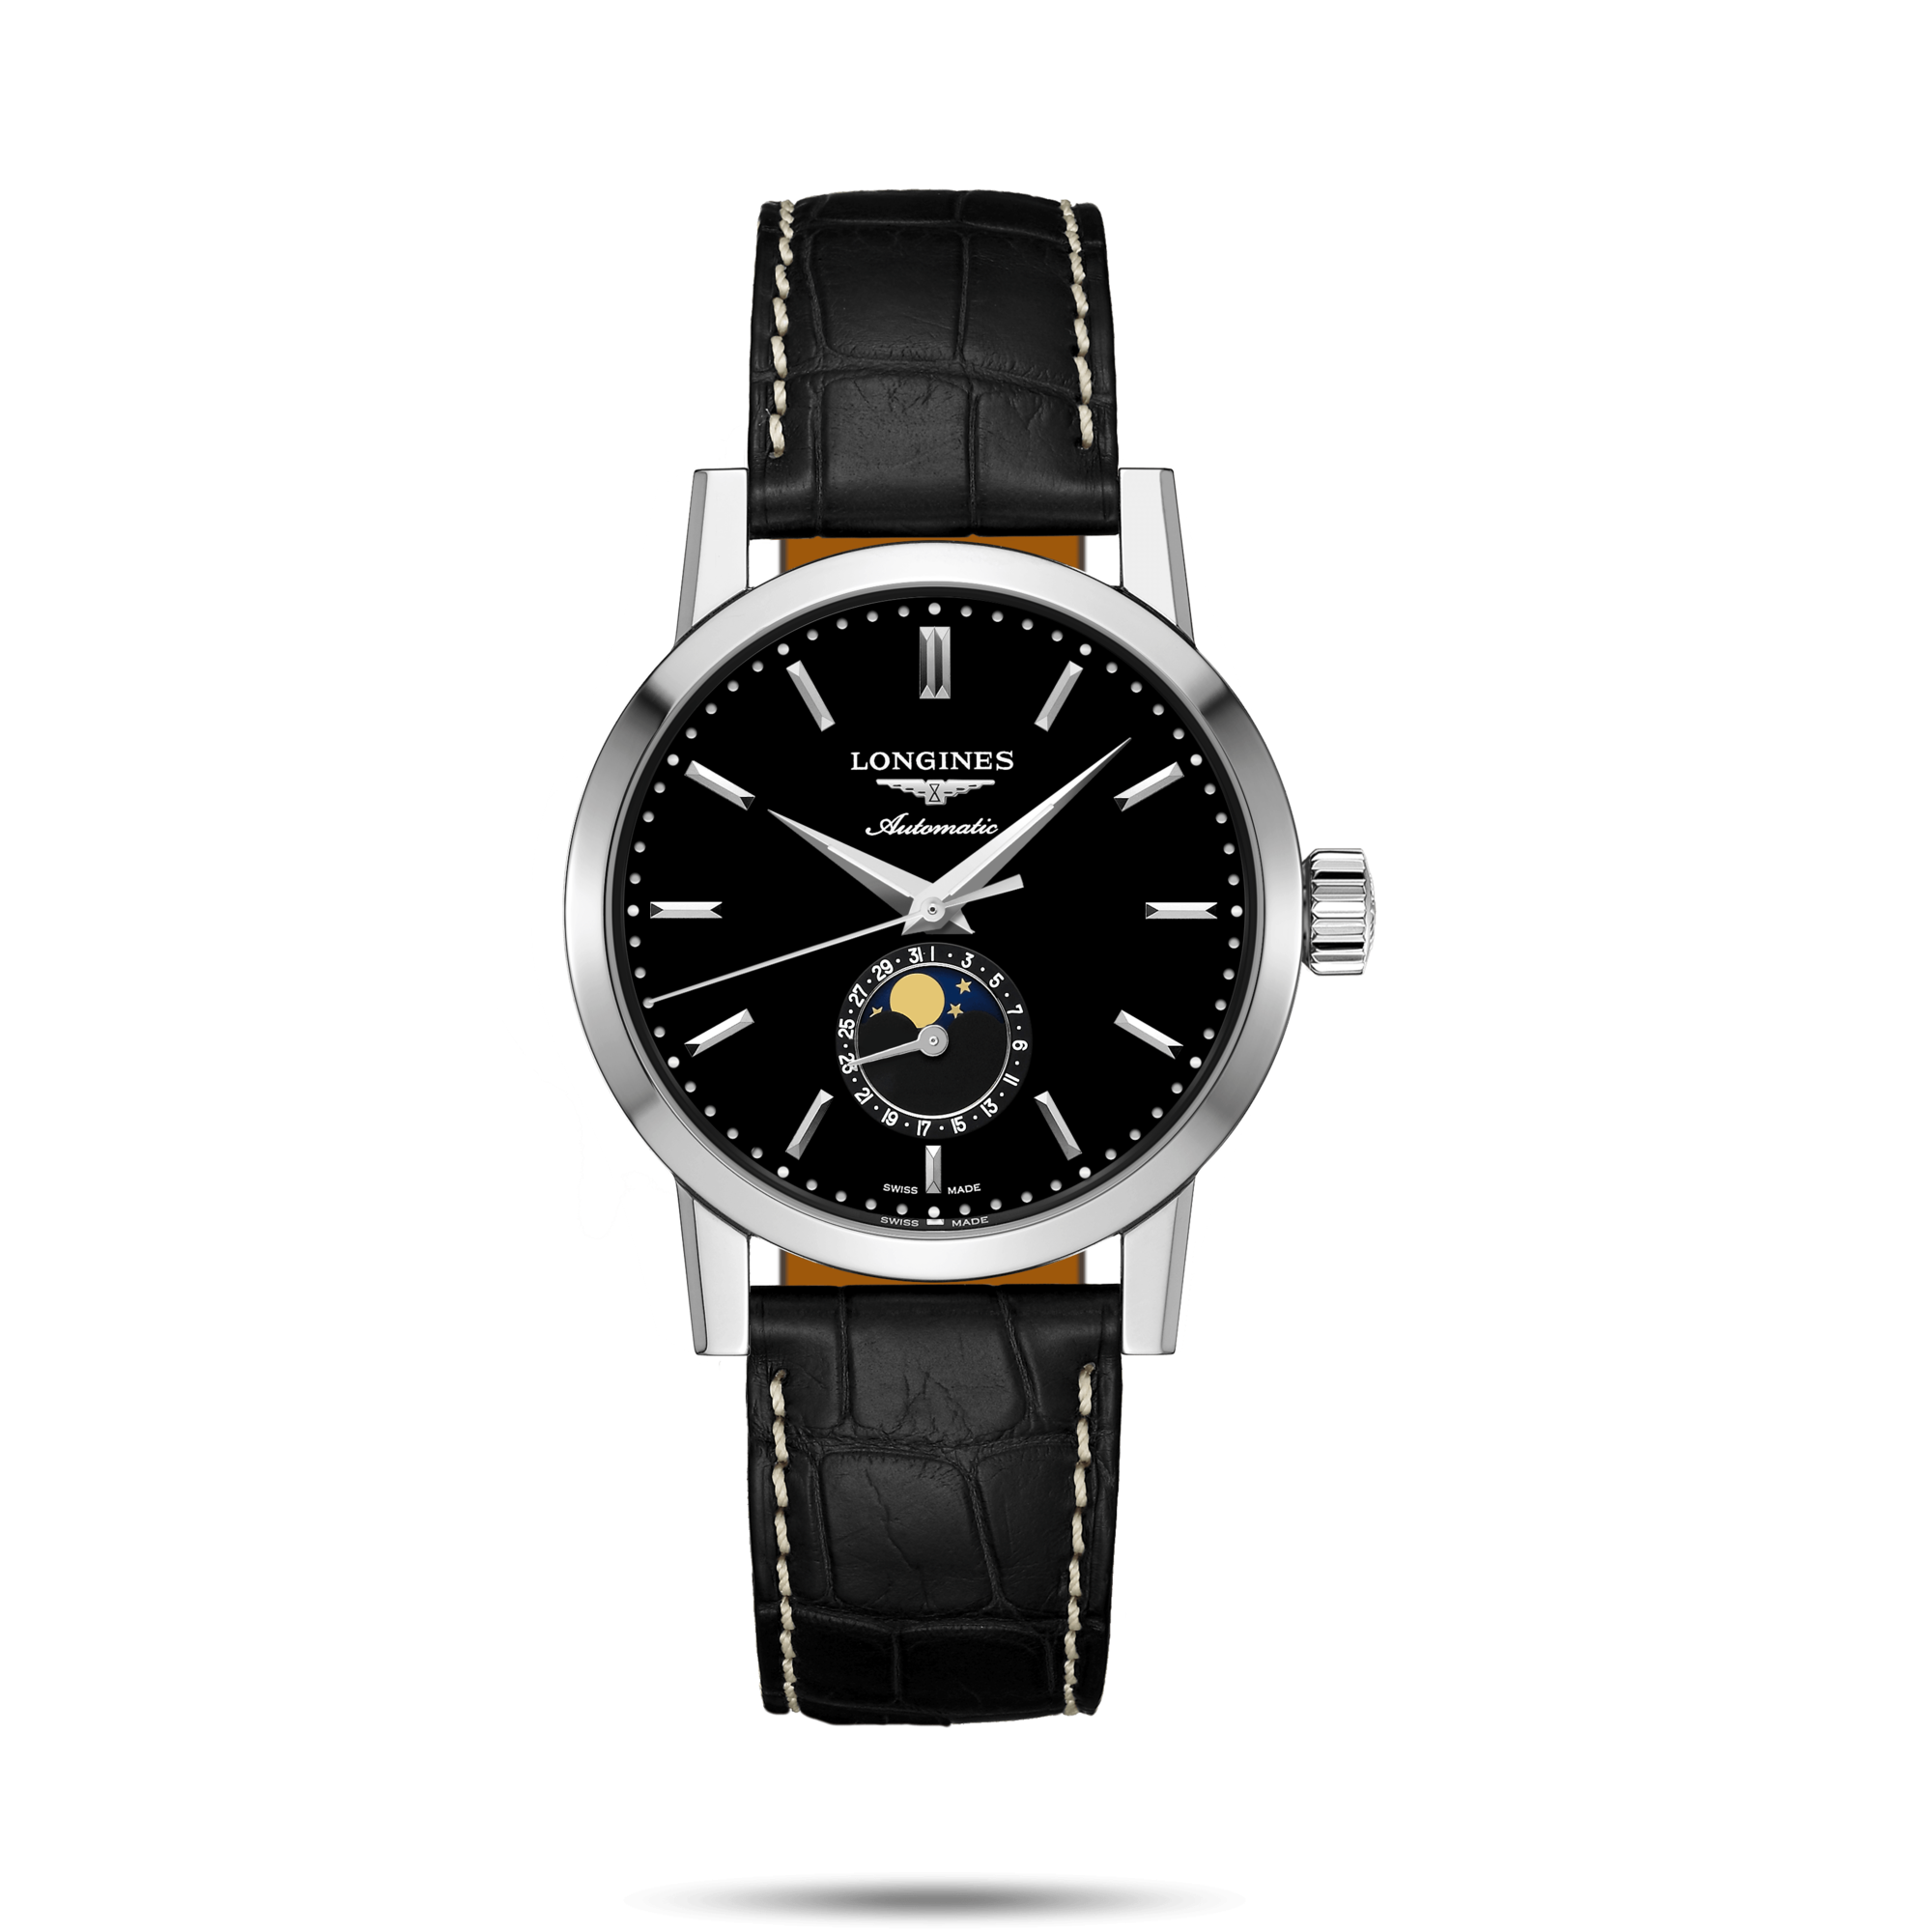 The Longines 1832 Watchmaking Tradition Référence :  L4.826.4.52.0 -1